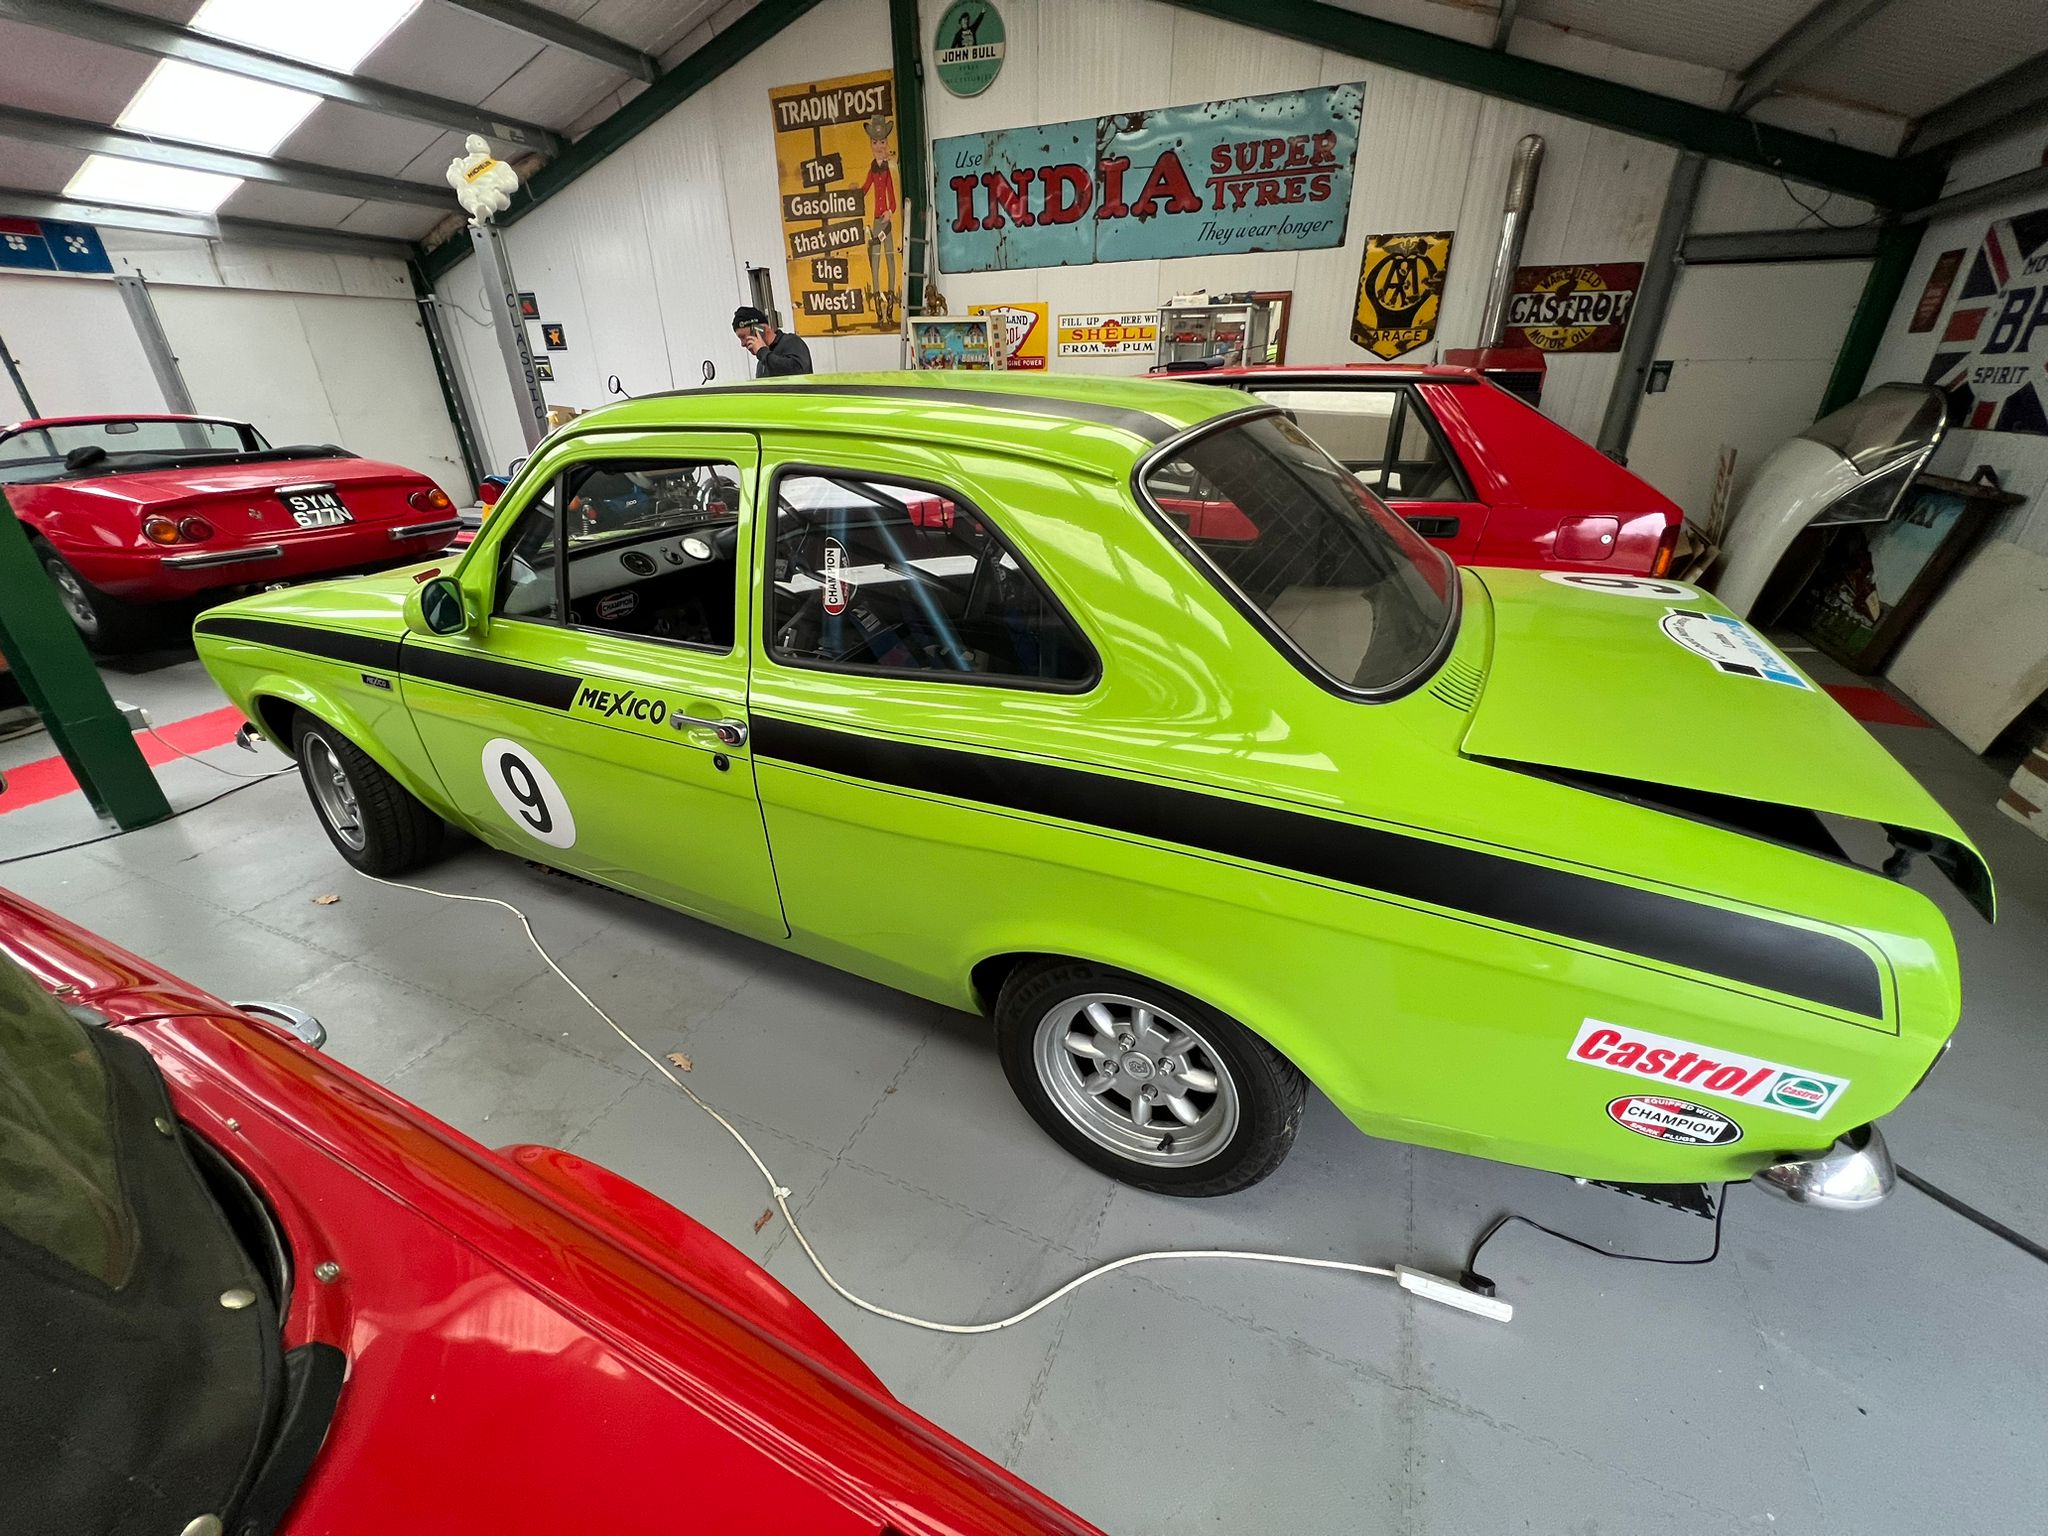 Ford Escort Mk1 X-Sport Mexico Competition Car 1973 - Image 12 of 18